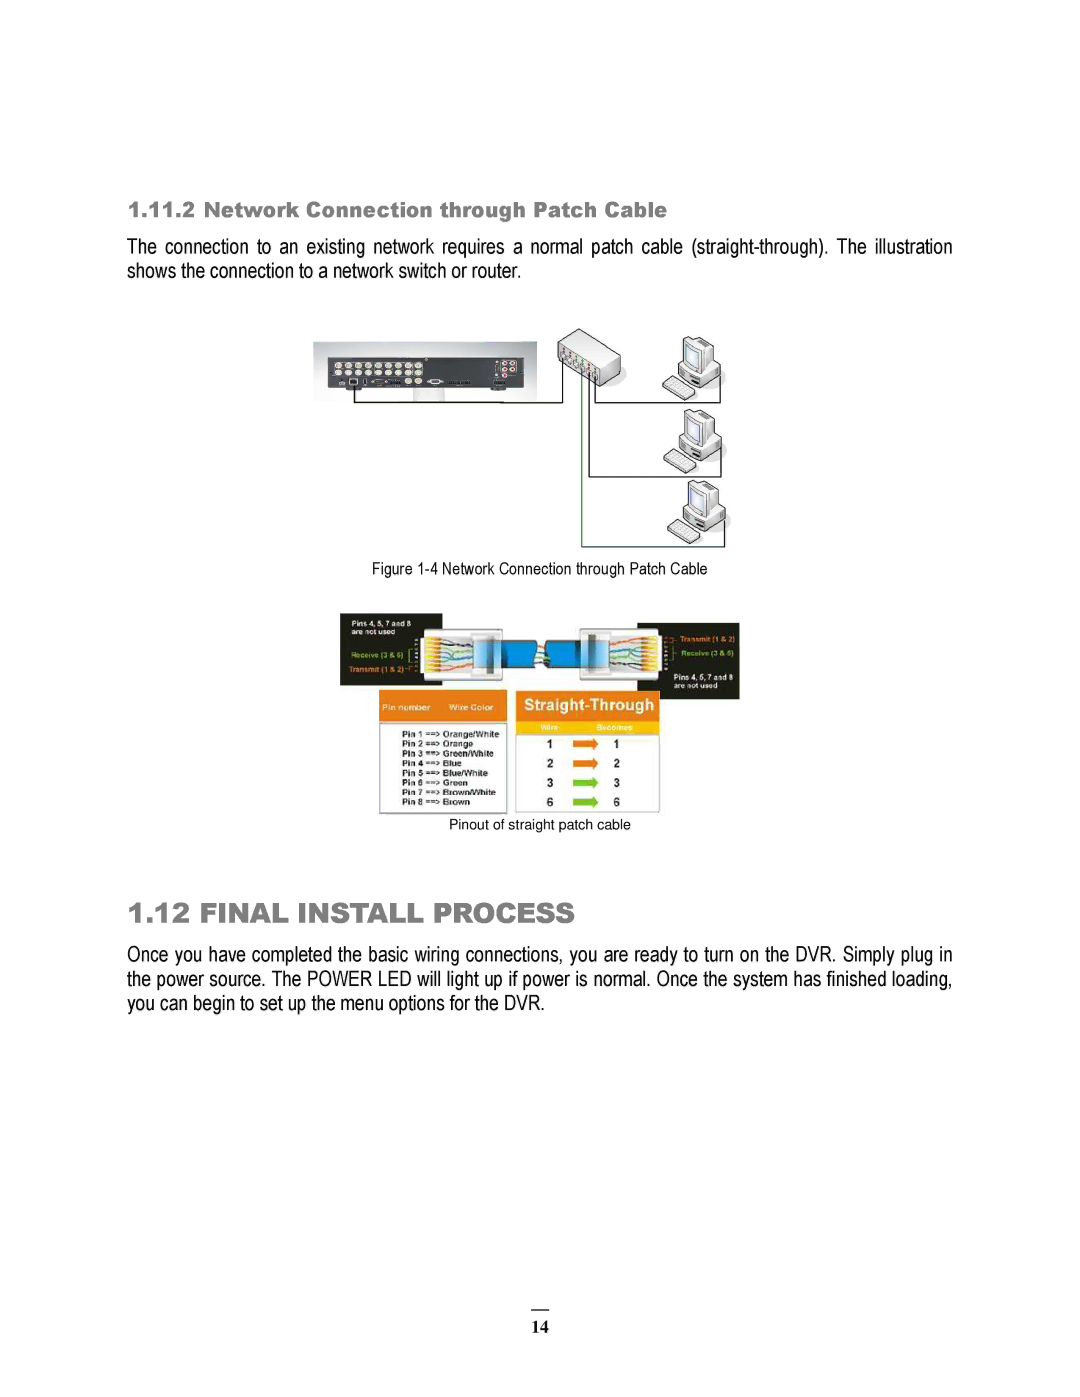 EverFocus ECOR264-4X1, ECOR264-9X1, ECOR264-16X1 user manual Final Install Process, Network Connection through Patch Cable 